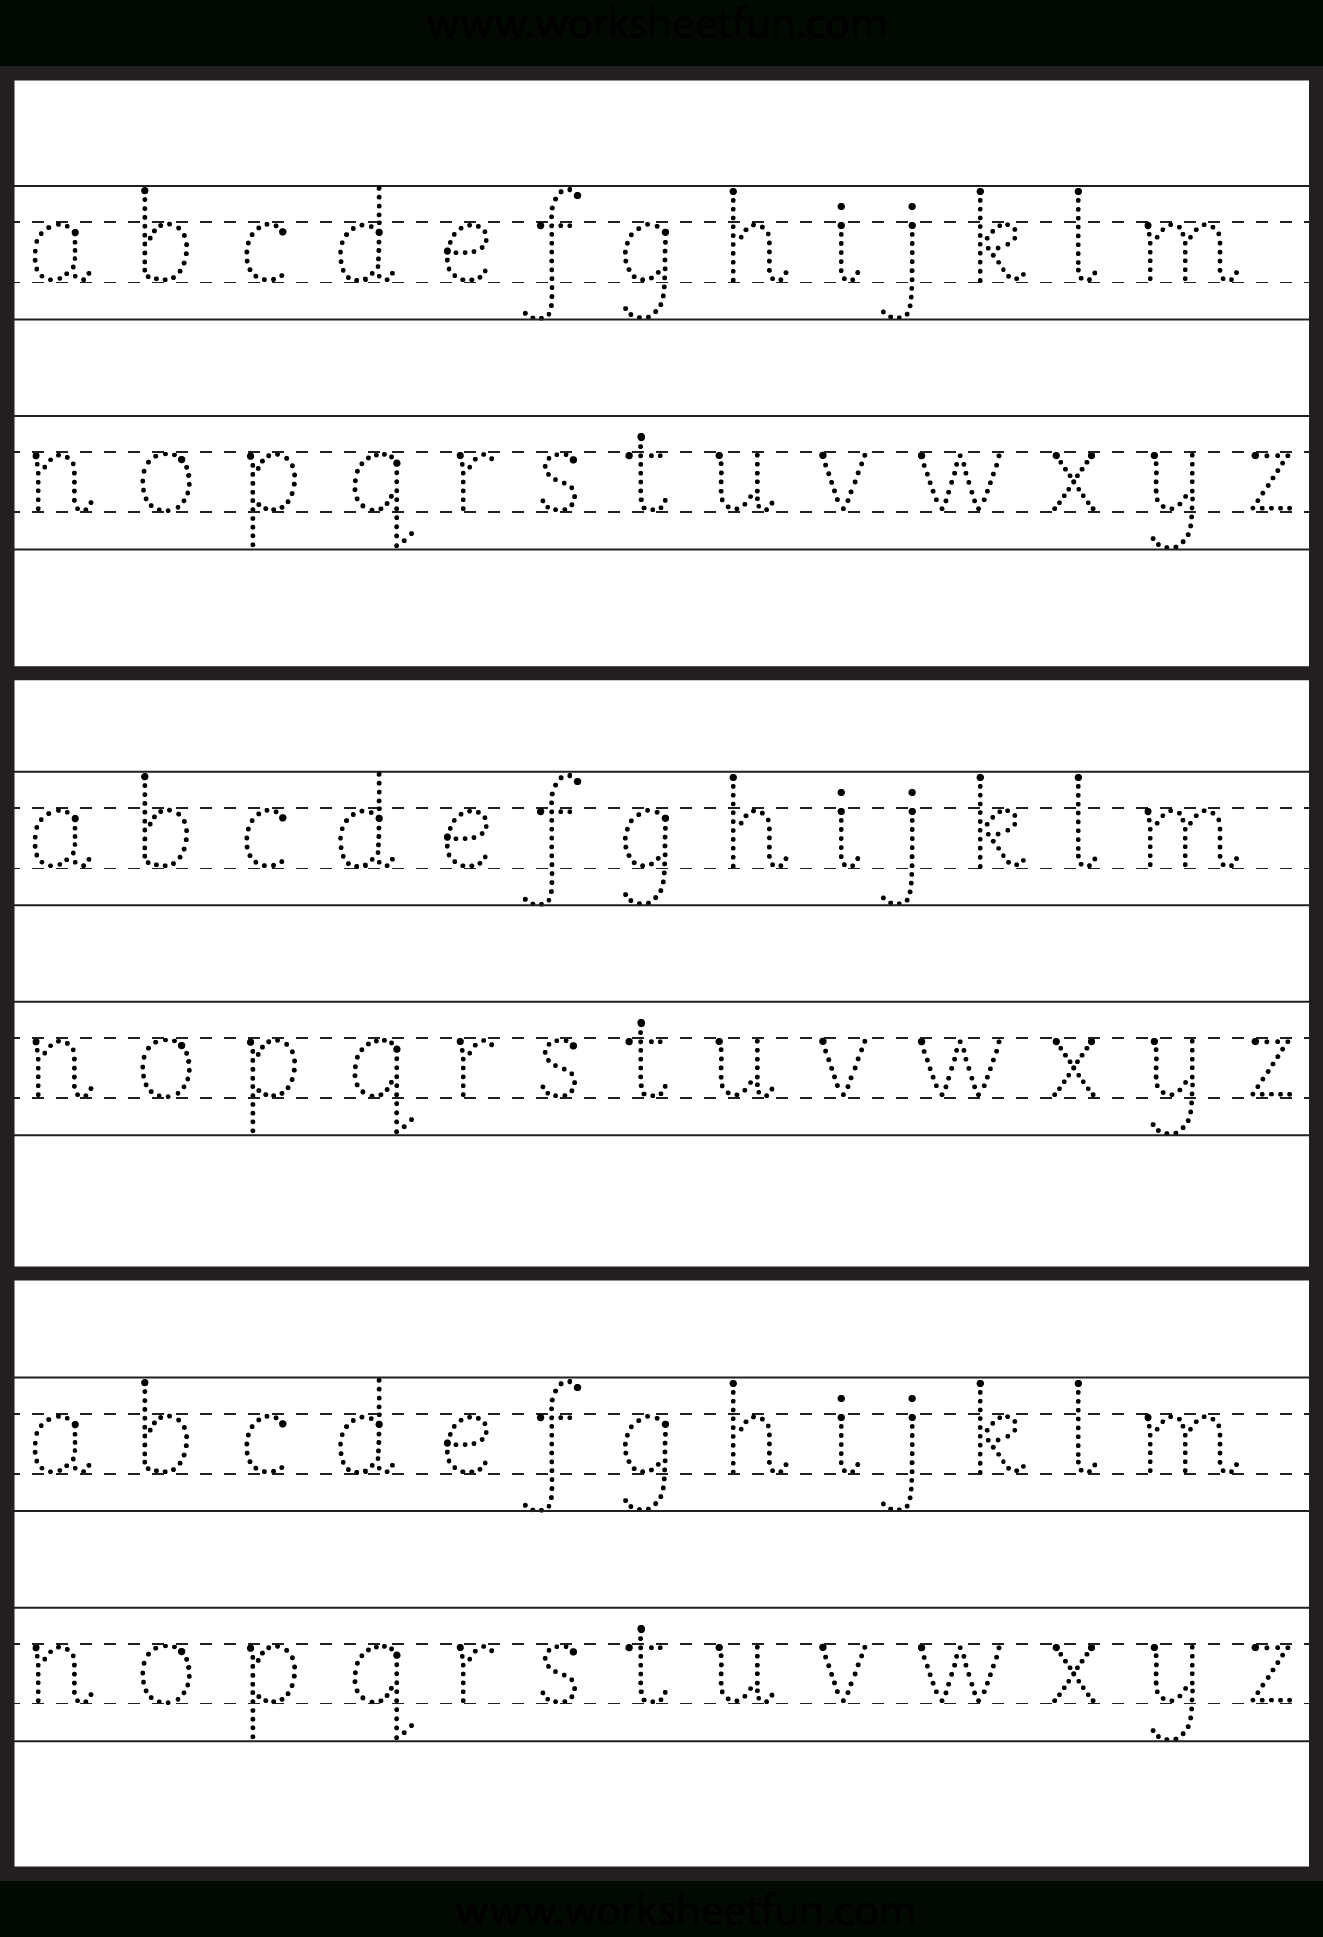 Lower Case Letters Tracing Sheets TracingLettersWorksheets